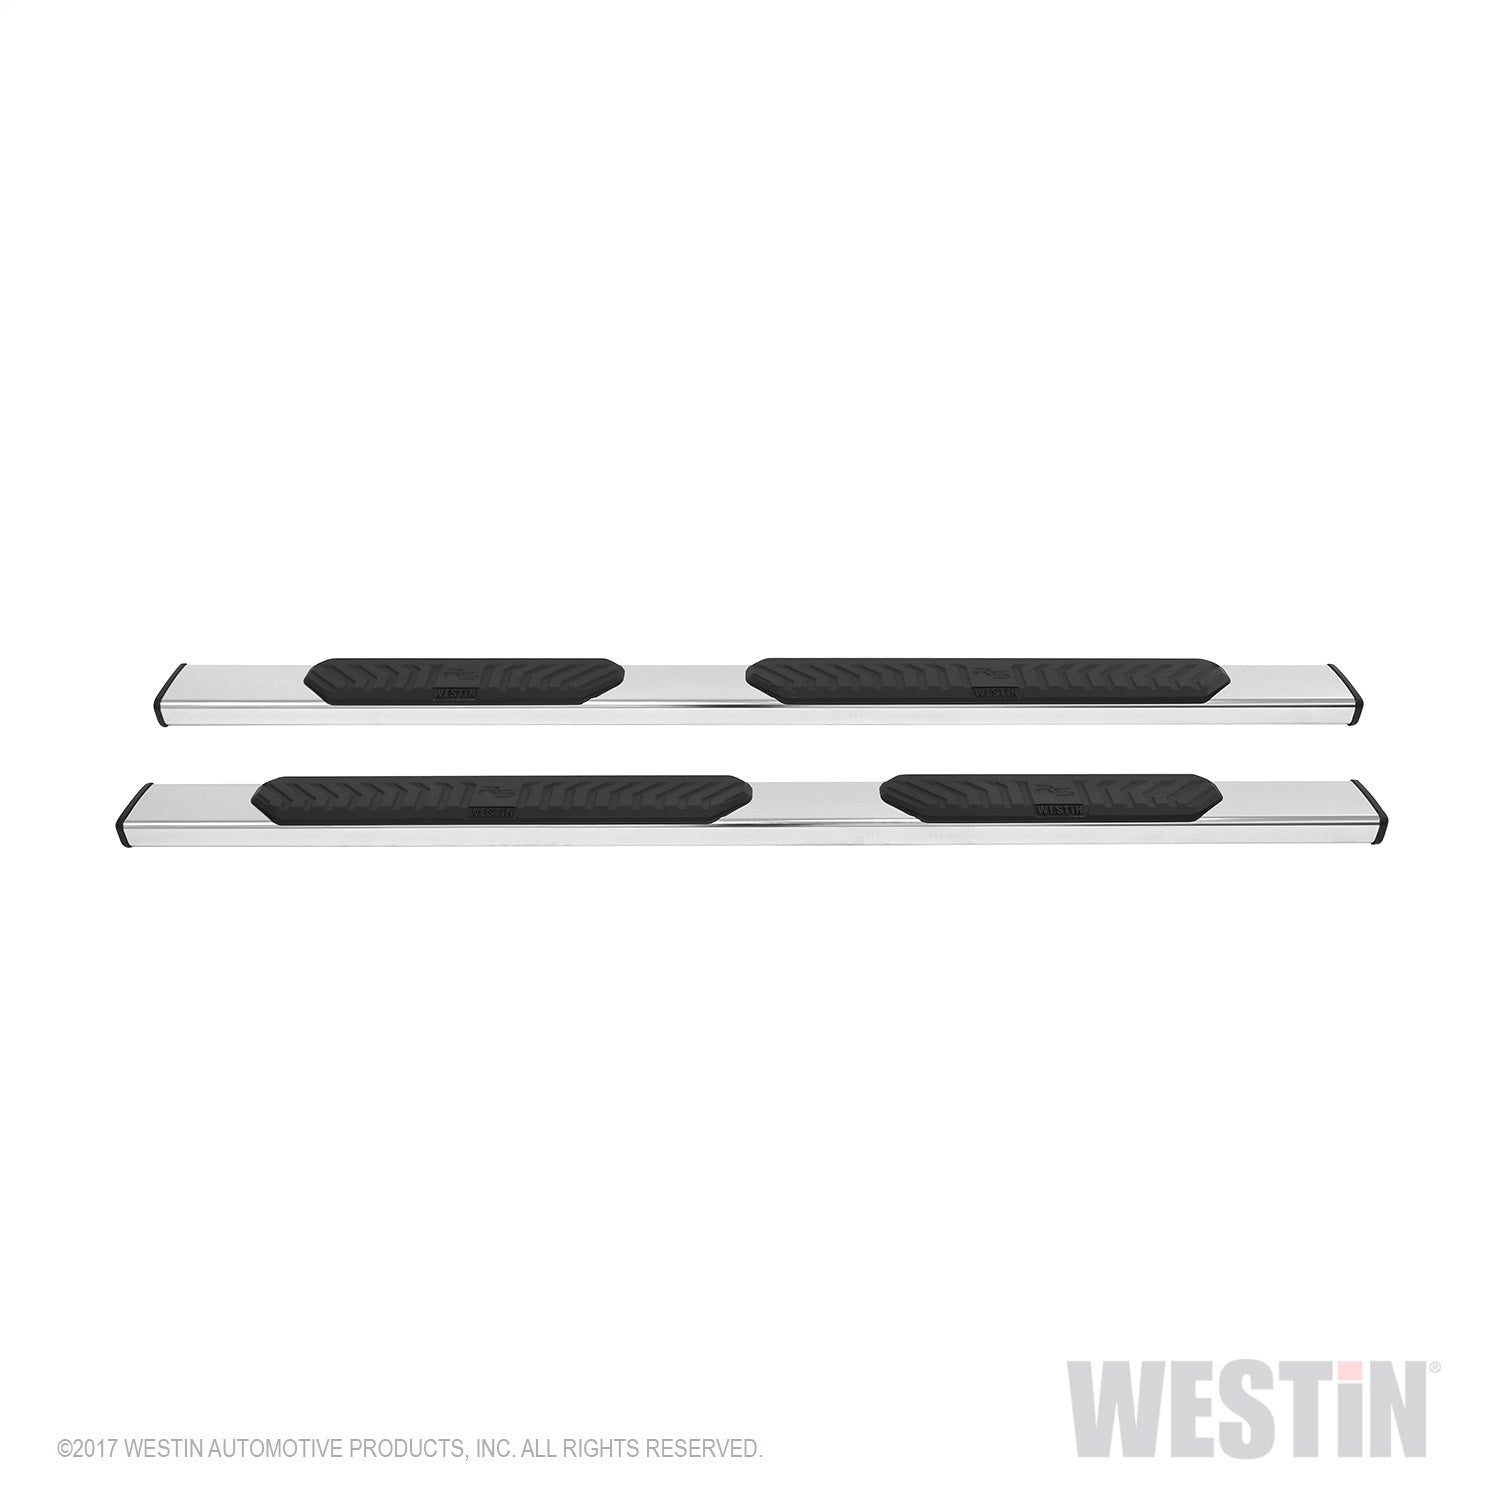 Westin 28-51170 R5 Nerf Step Bars Fits 05-21 Frontier